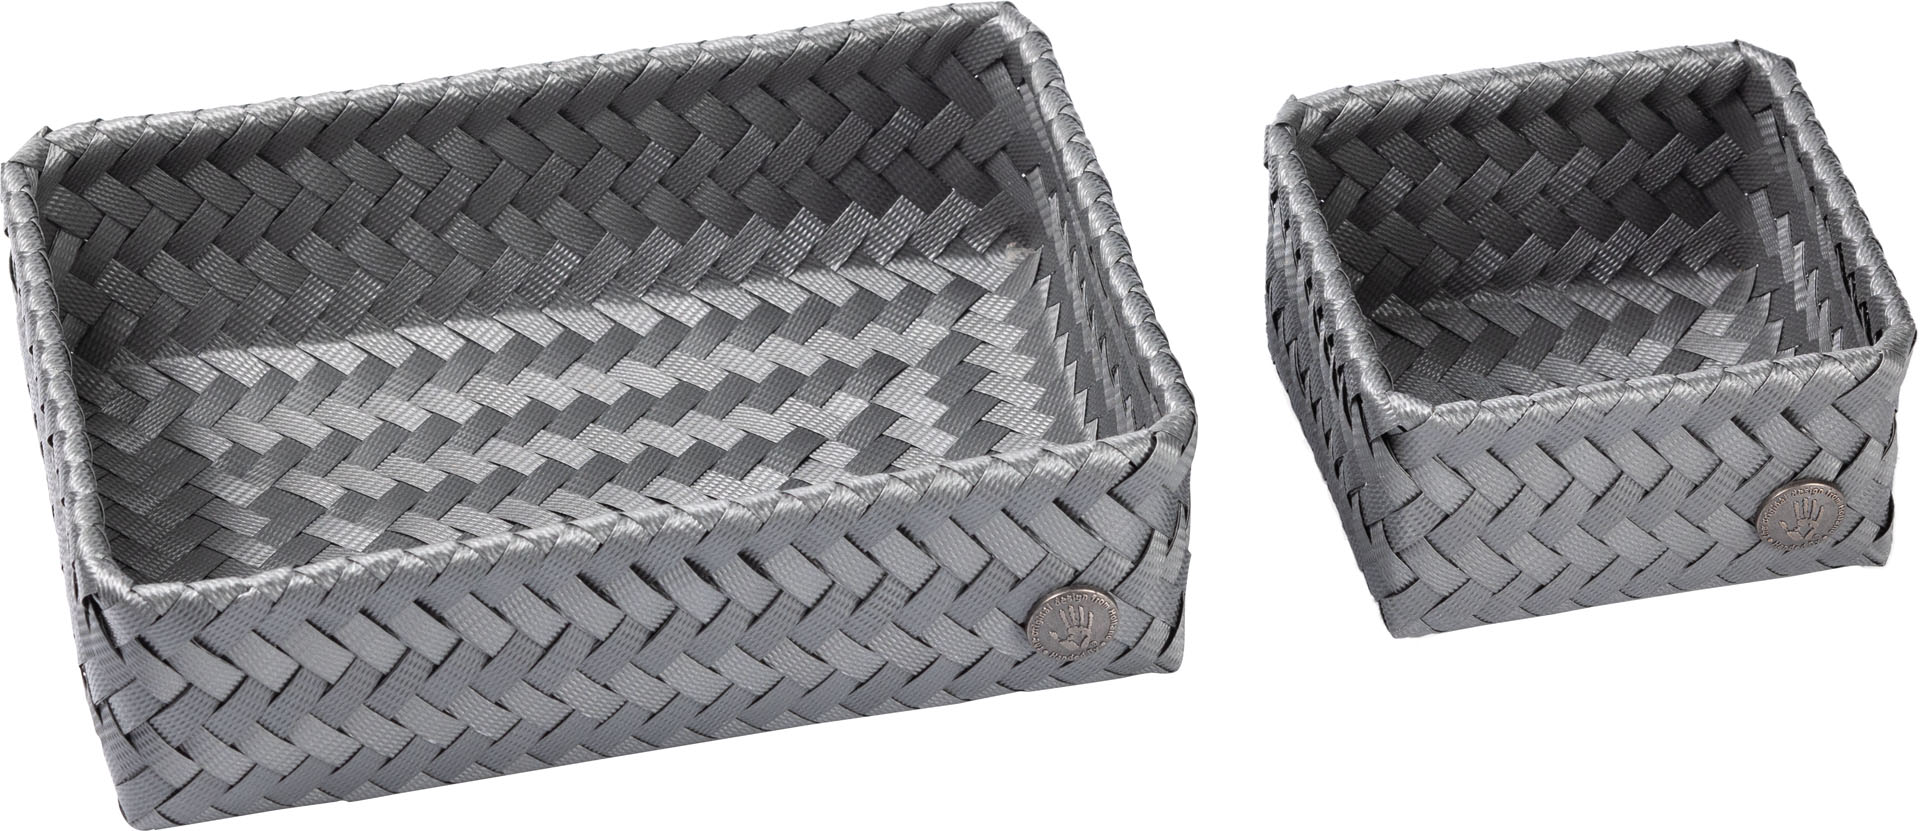 Container Fit, set of 2 pcs.